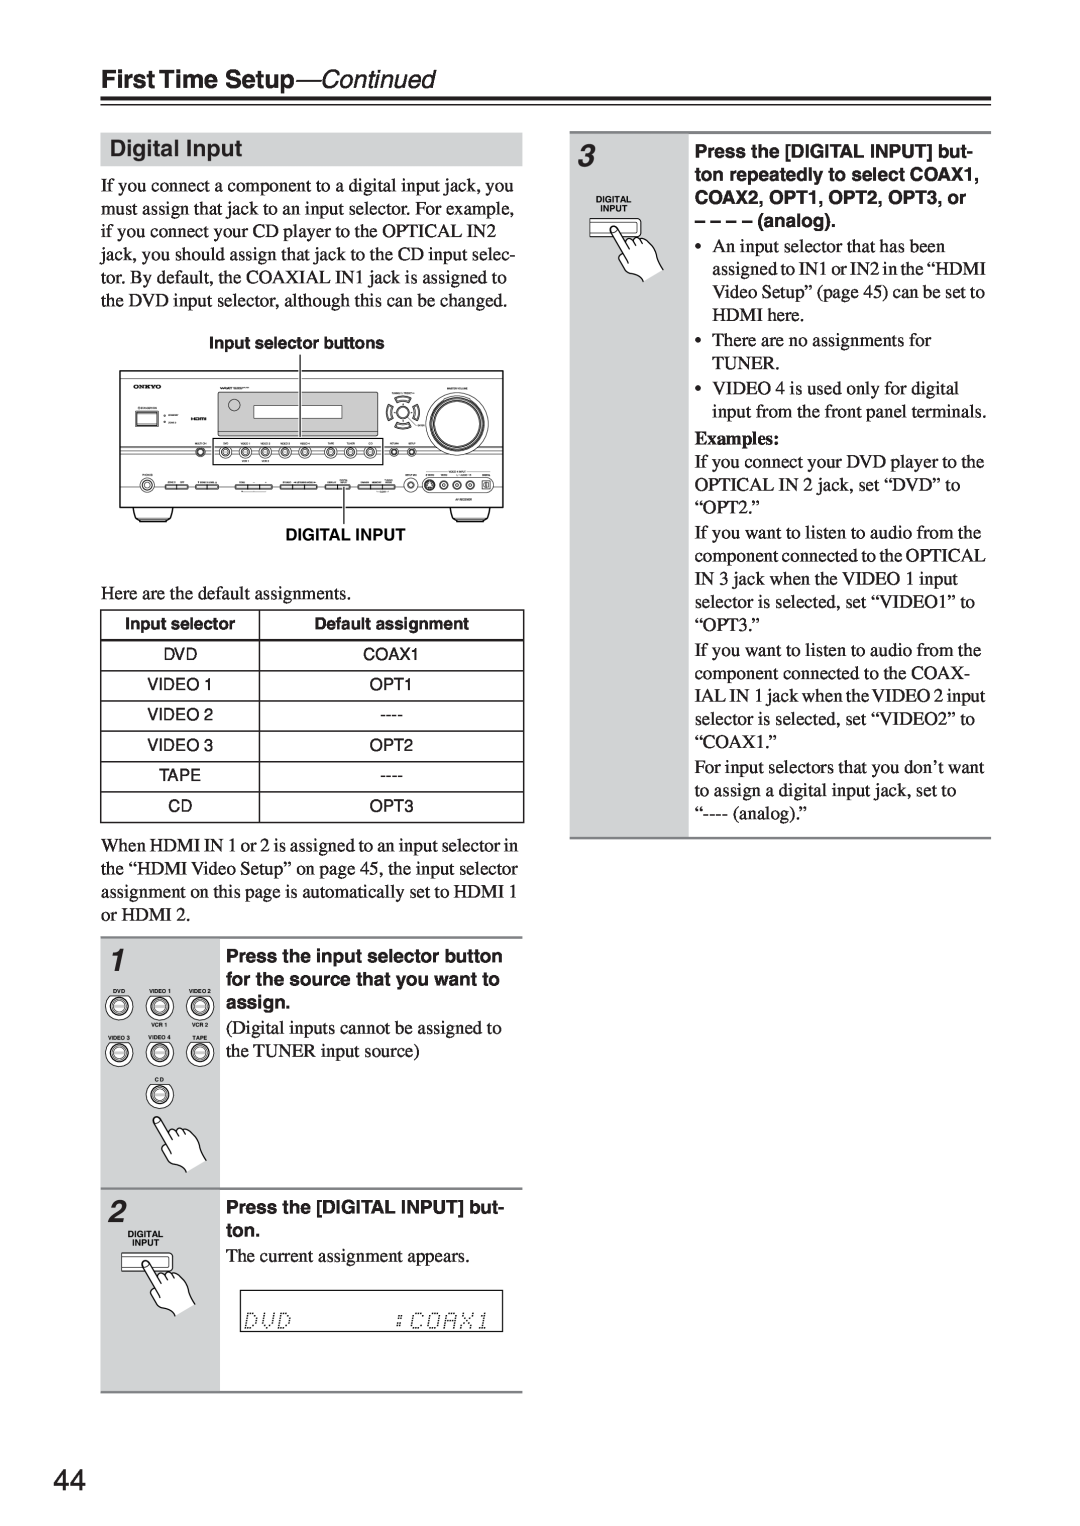 Onkyo TX-SR604/604E Digital Input, First Time Setup—Continued, Digital inputs cannot be assigned to, Examples 